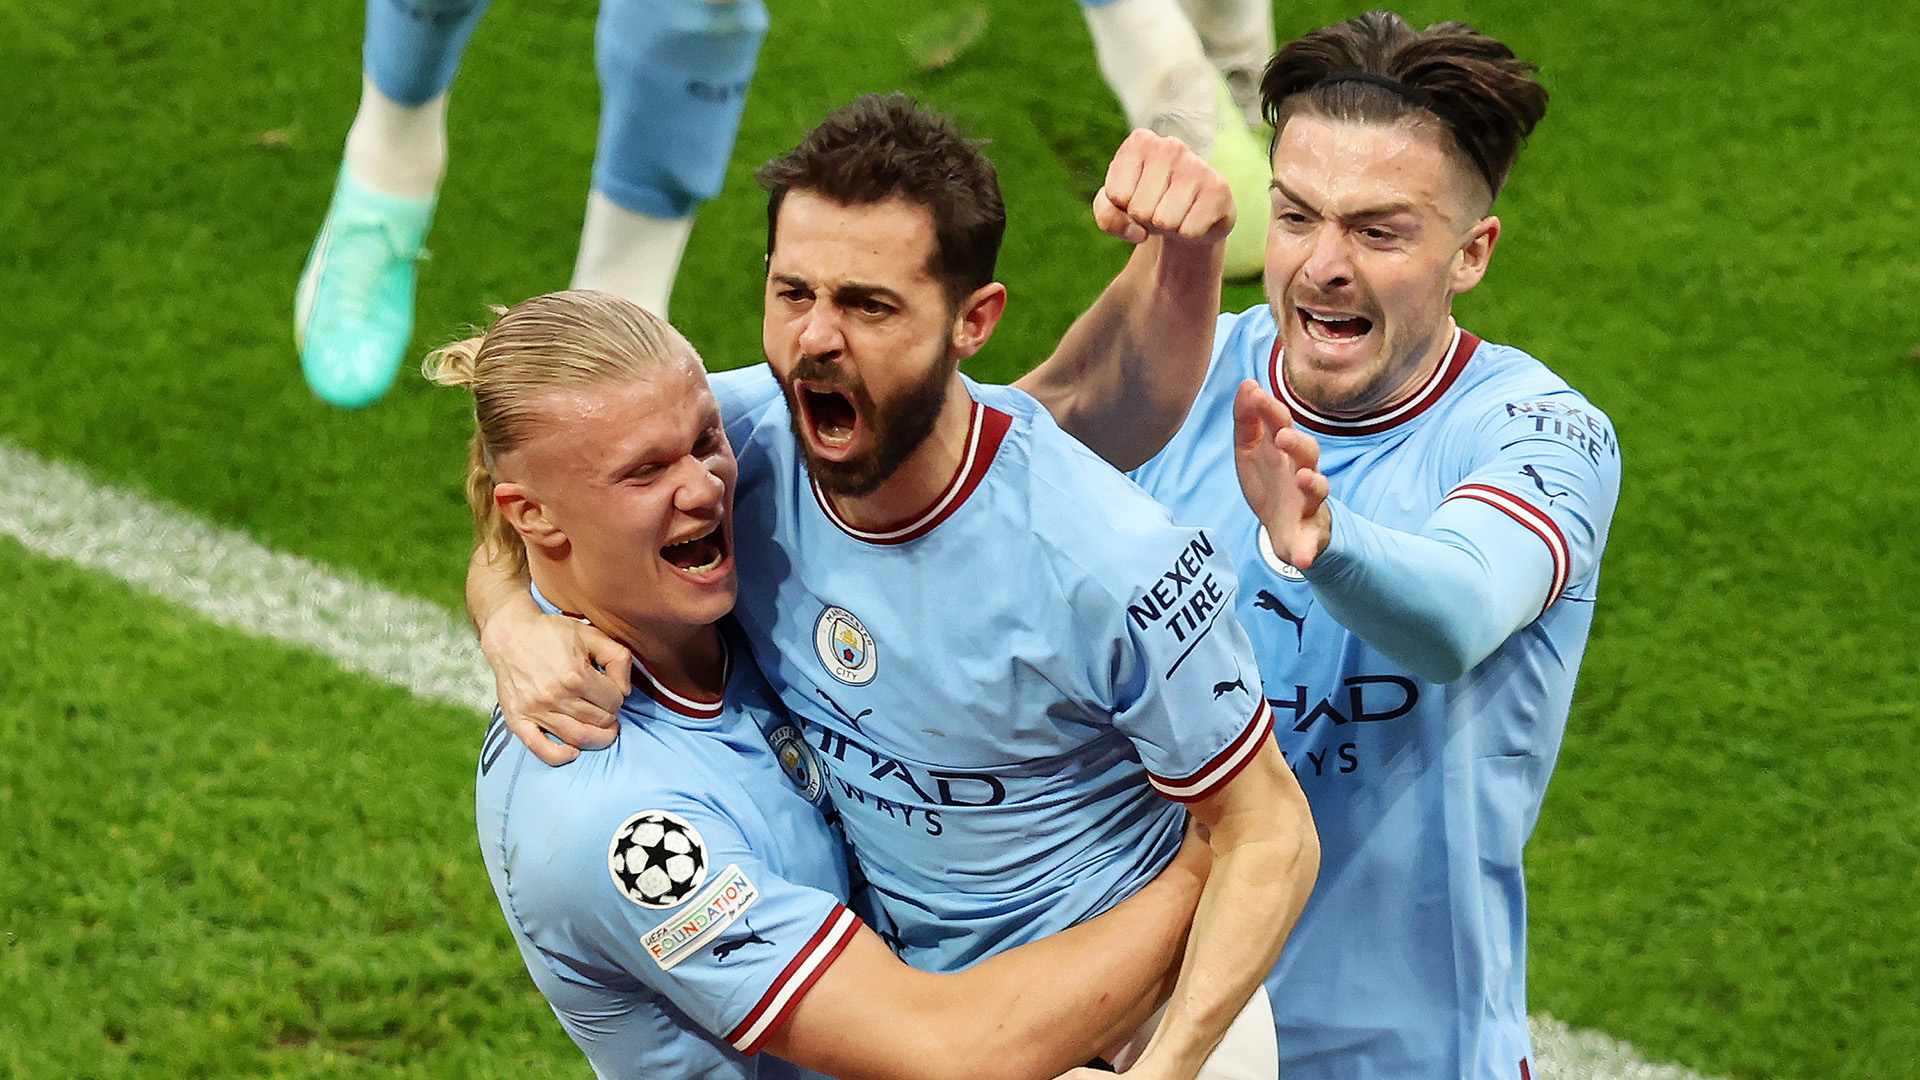 Bernardo Silva of Manchester City celebrates with teammates Erling Haaland and Jack Grealish after scoring the teams second goal during the UEFA Champions League semi-final second leg match between Manchester City FC and Real Madrid at Etihad Stadium on May 17, 2023 in Manchester, England.